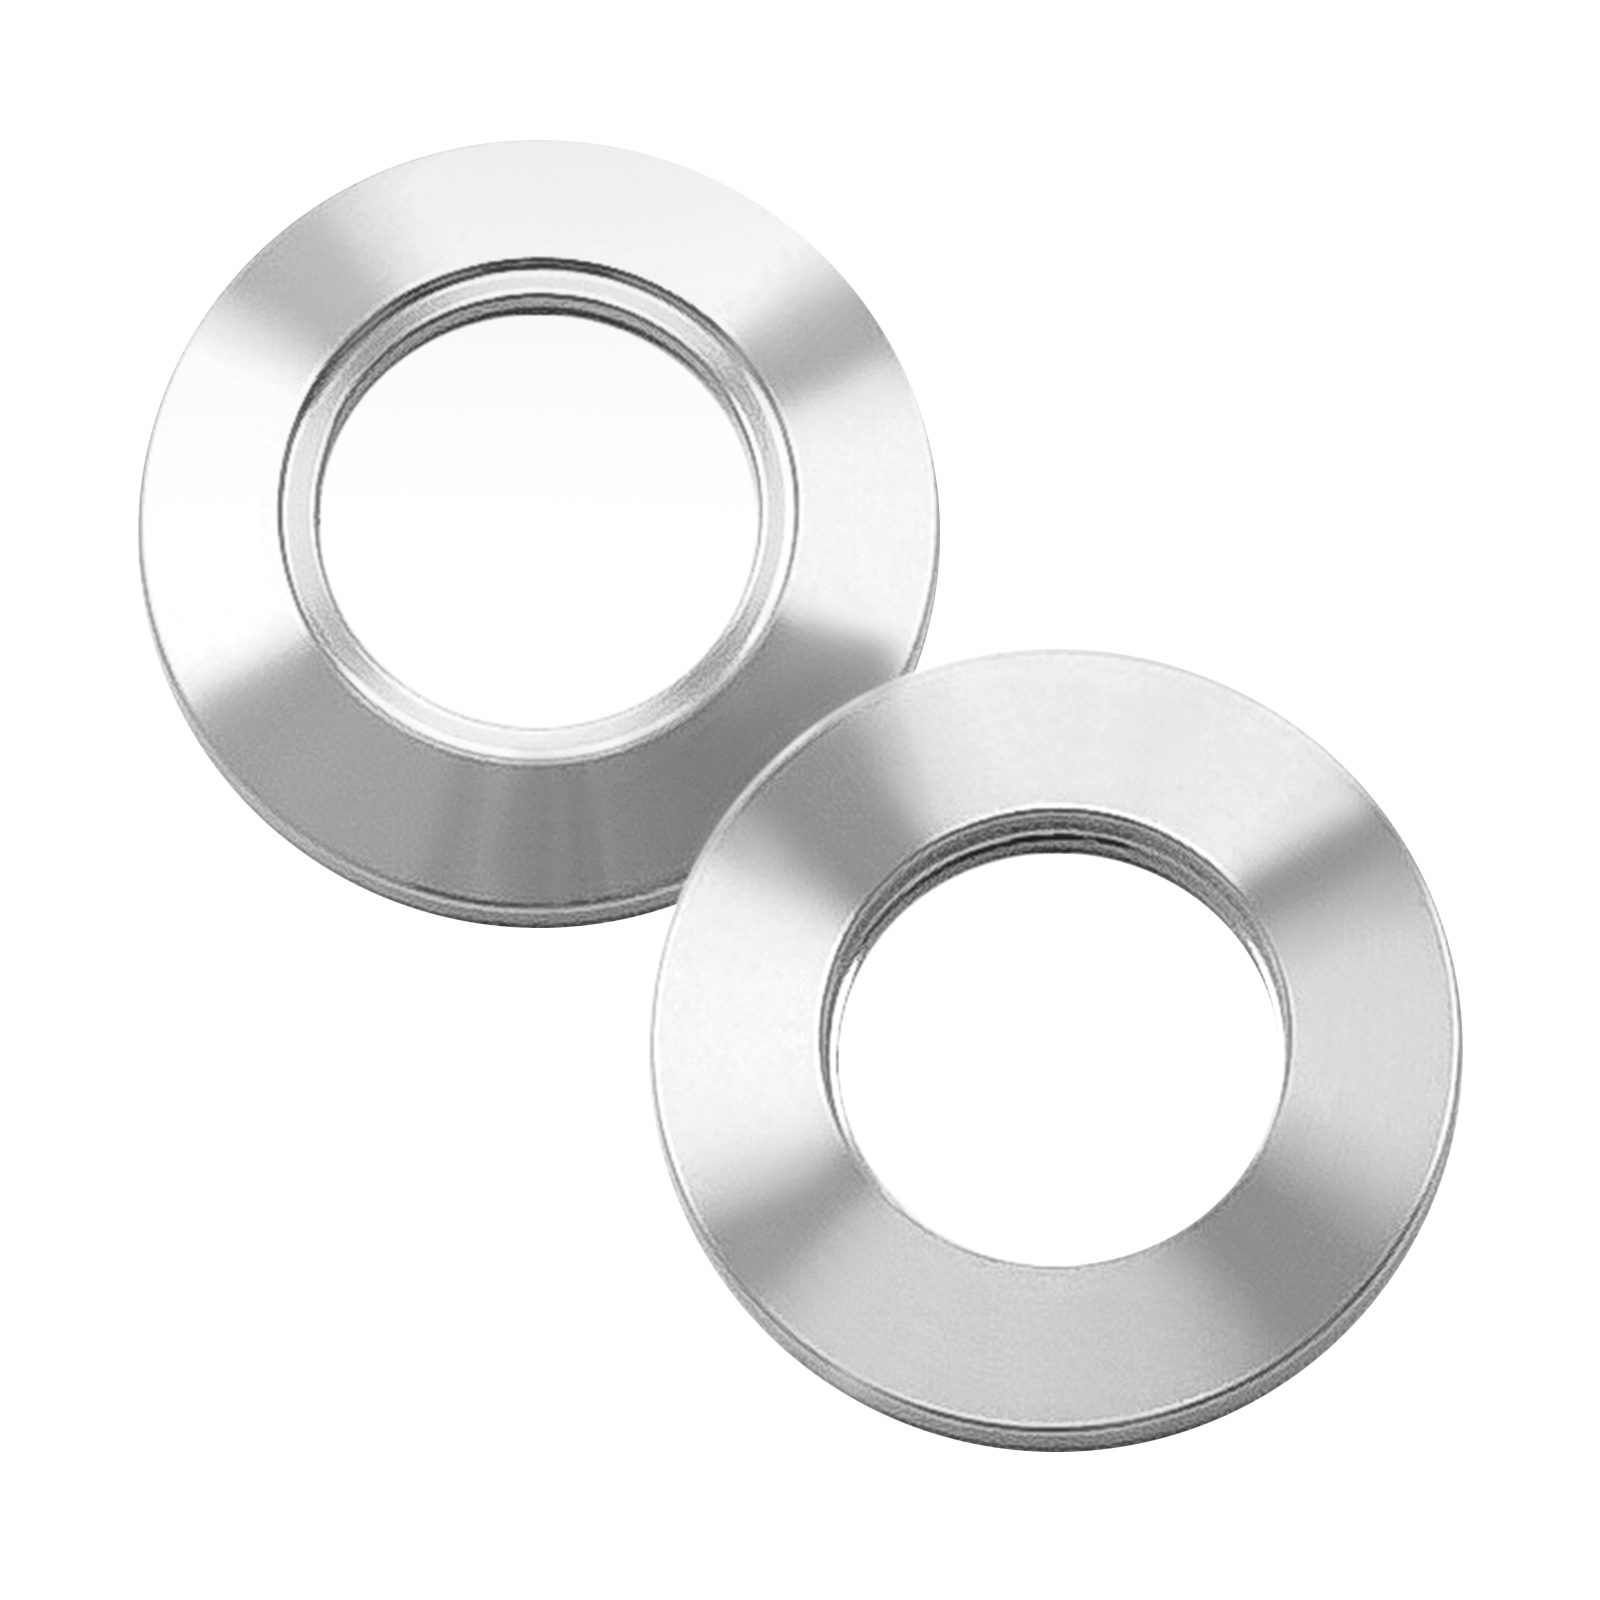 ISO-KF16 Stainless Steel Blank Vacuum Flanges with Bore, 0.75″